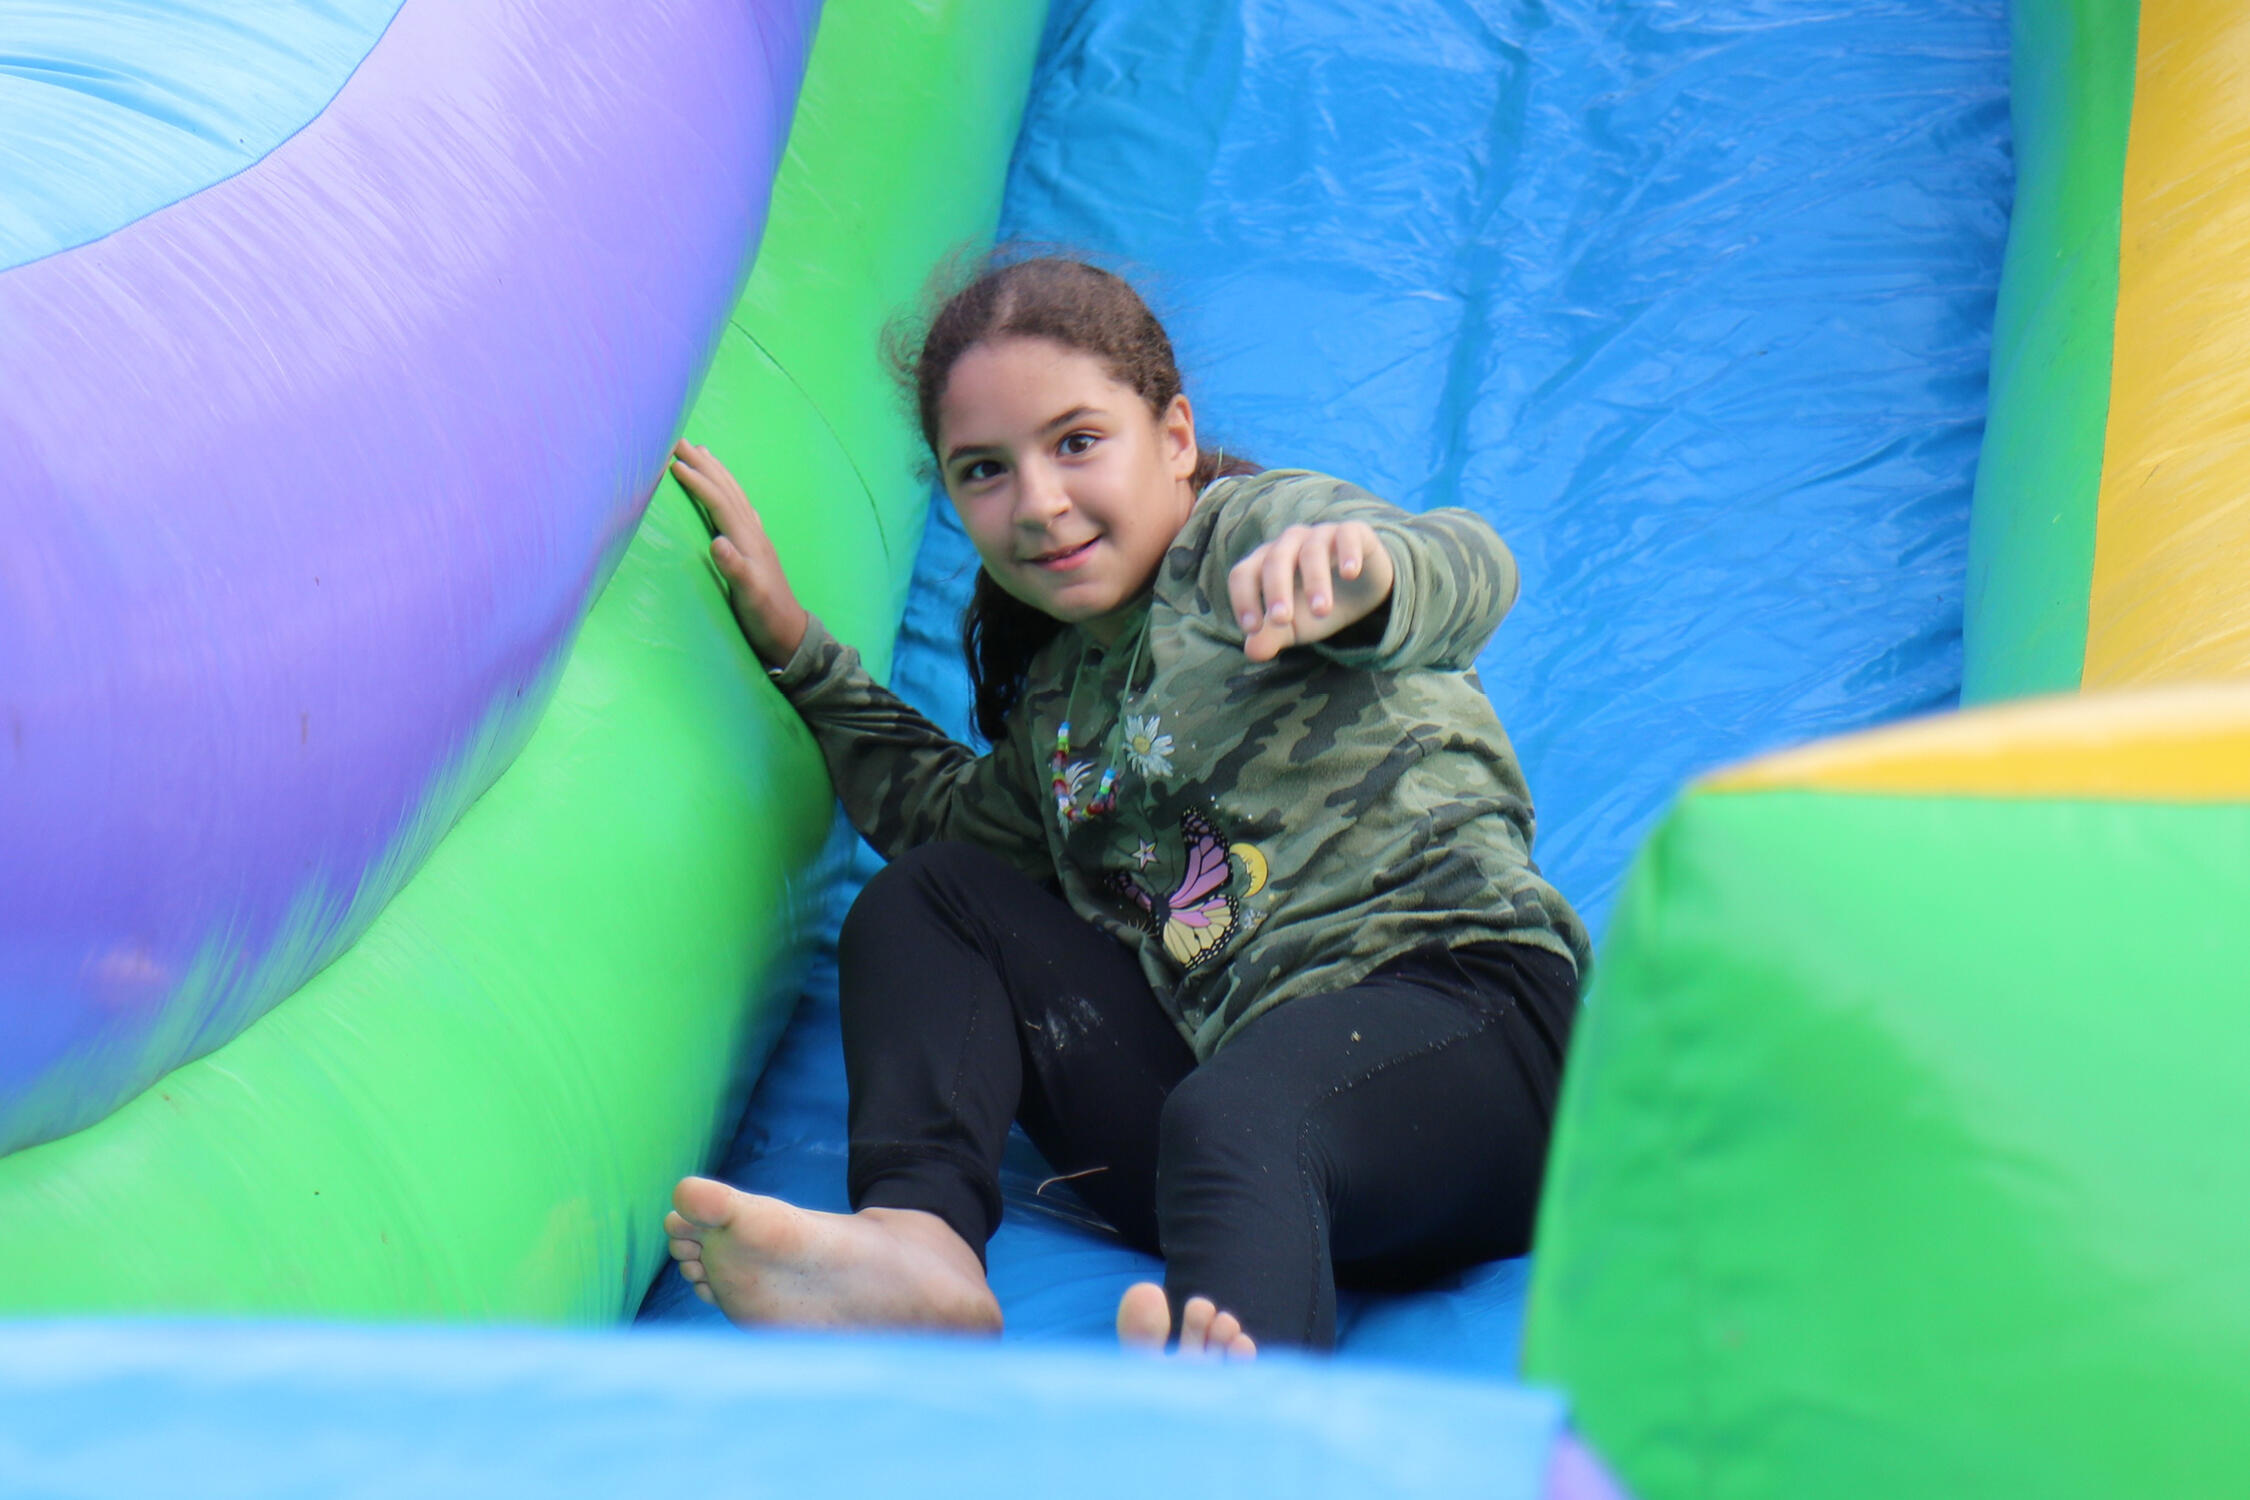 Student smiling while sliding down a large inflatable slide